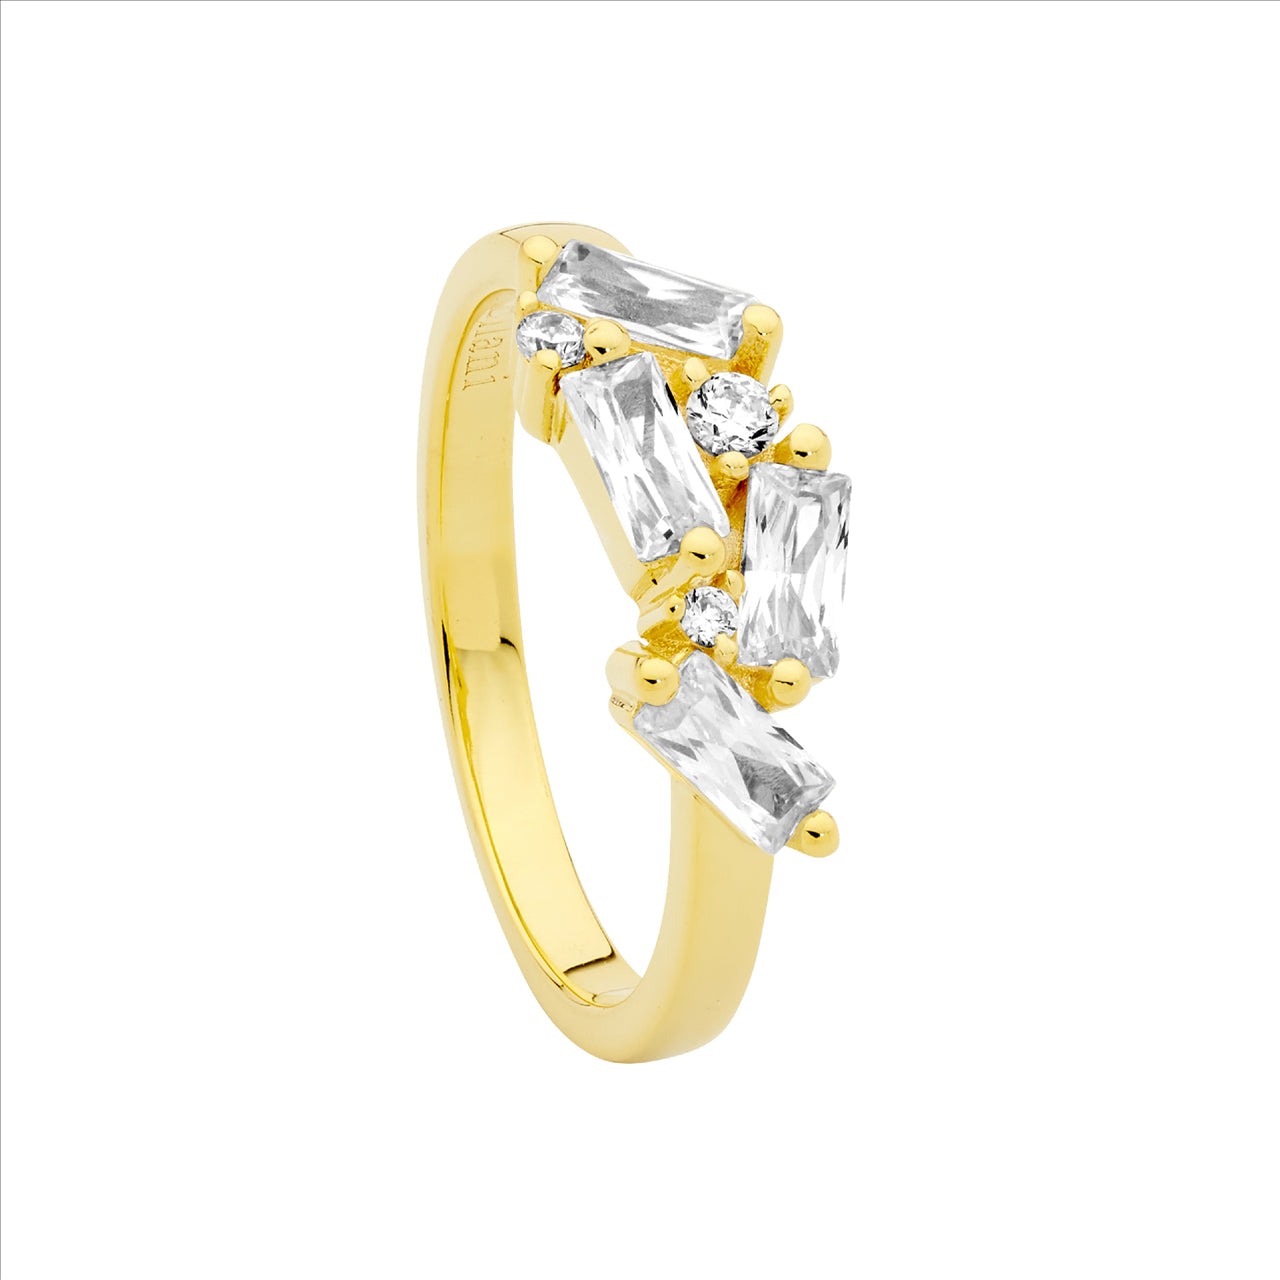 Staggered Cubic Zirconia Dress Ring - Yellow Gold.